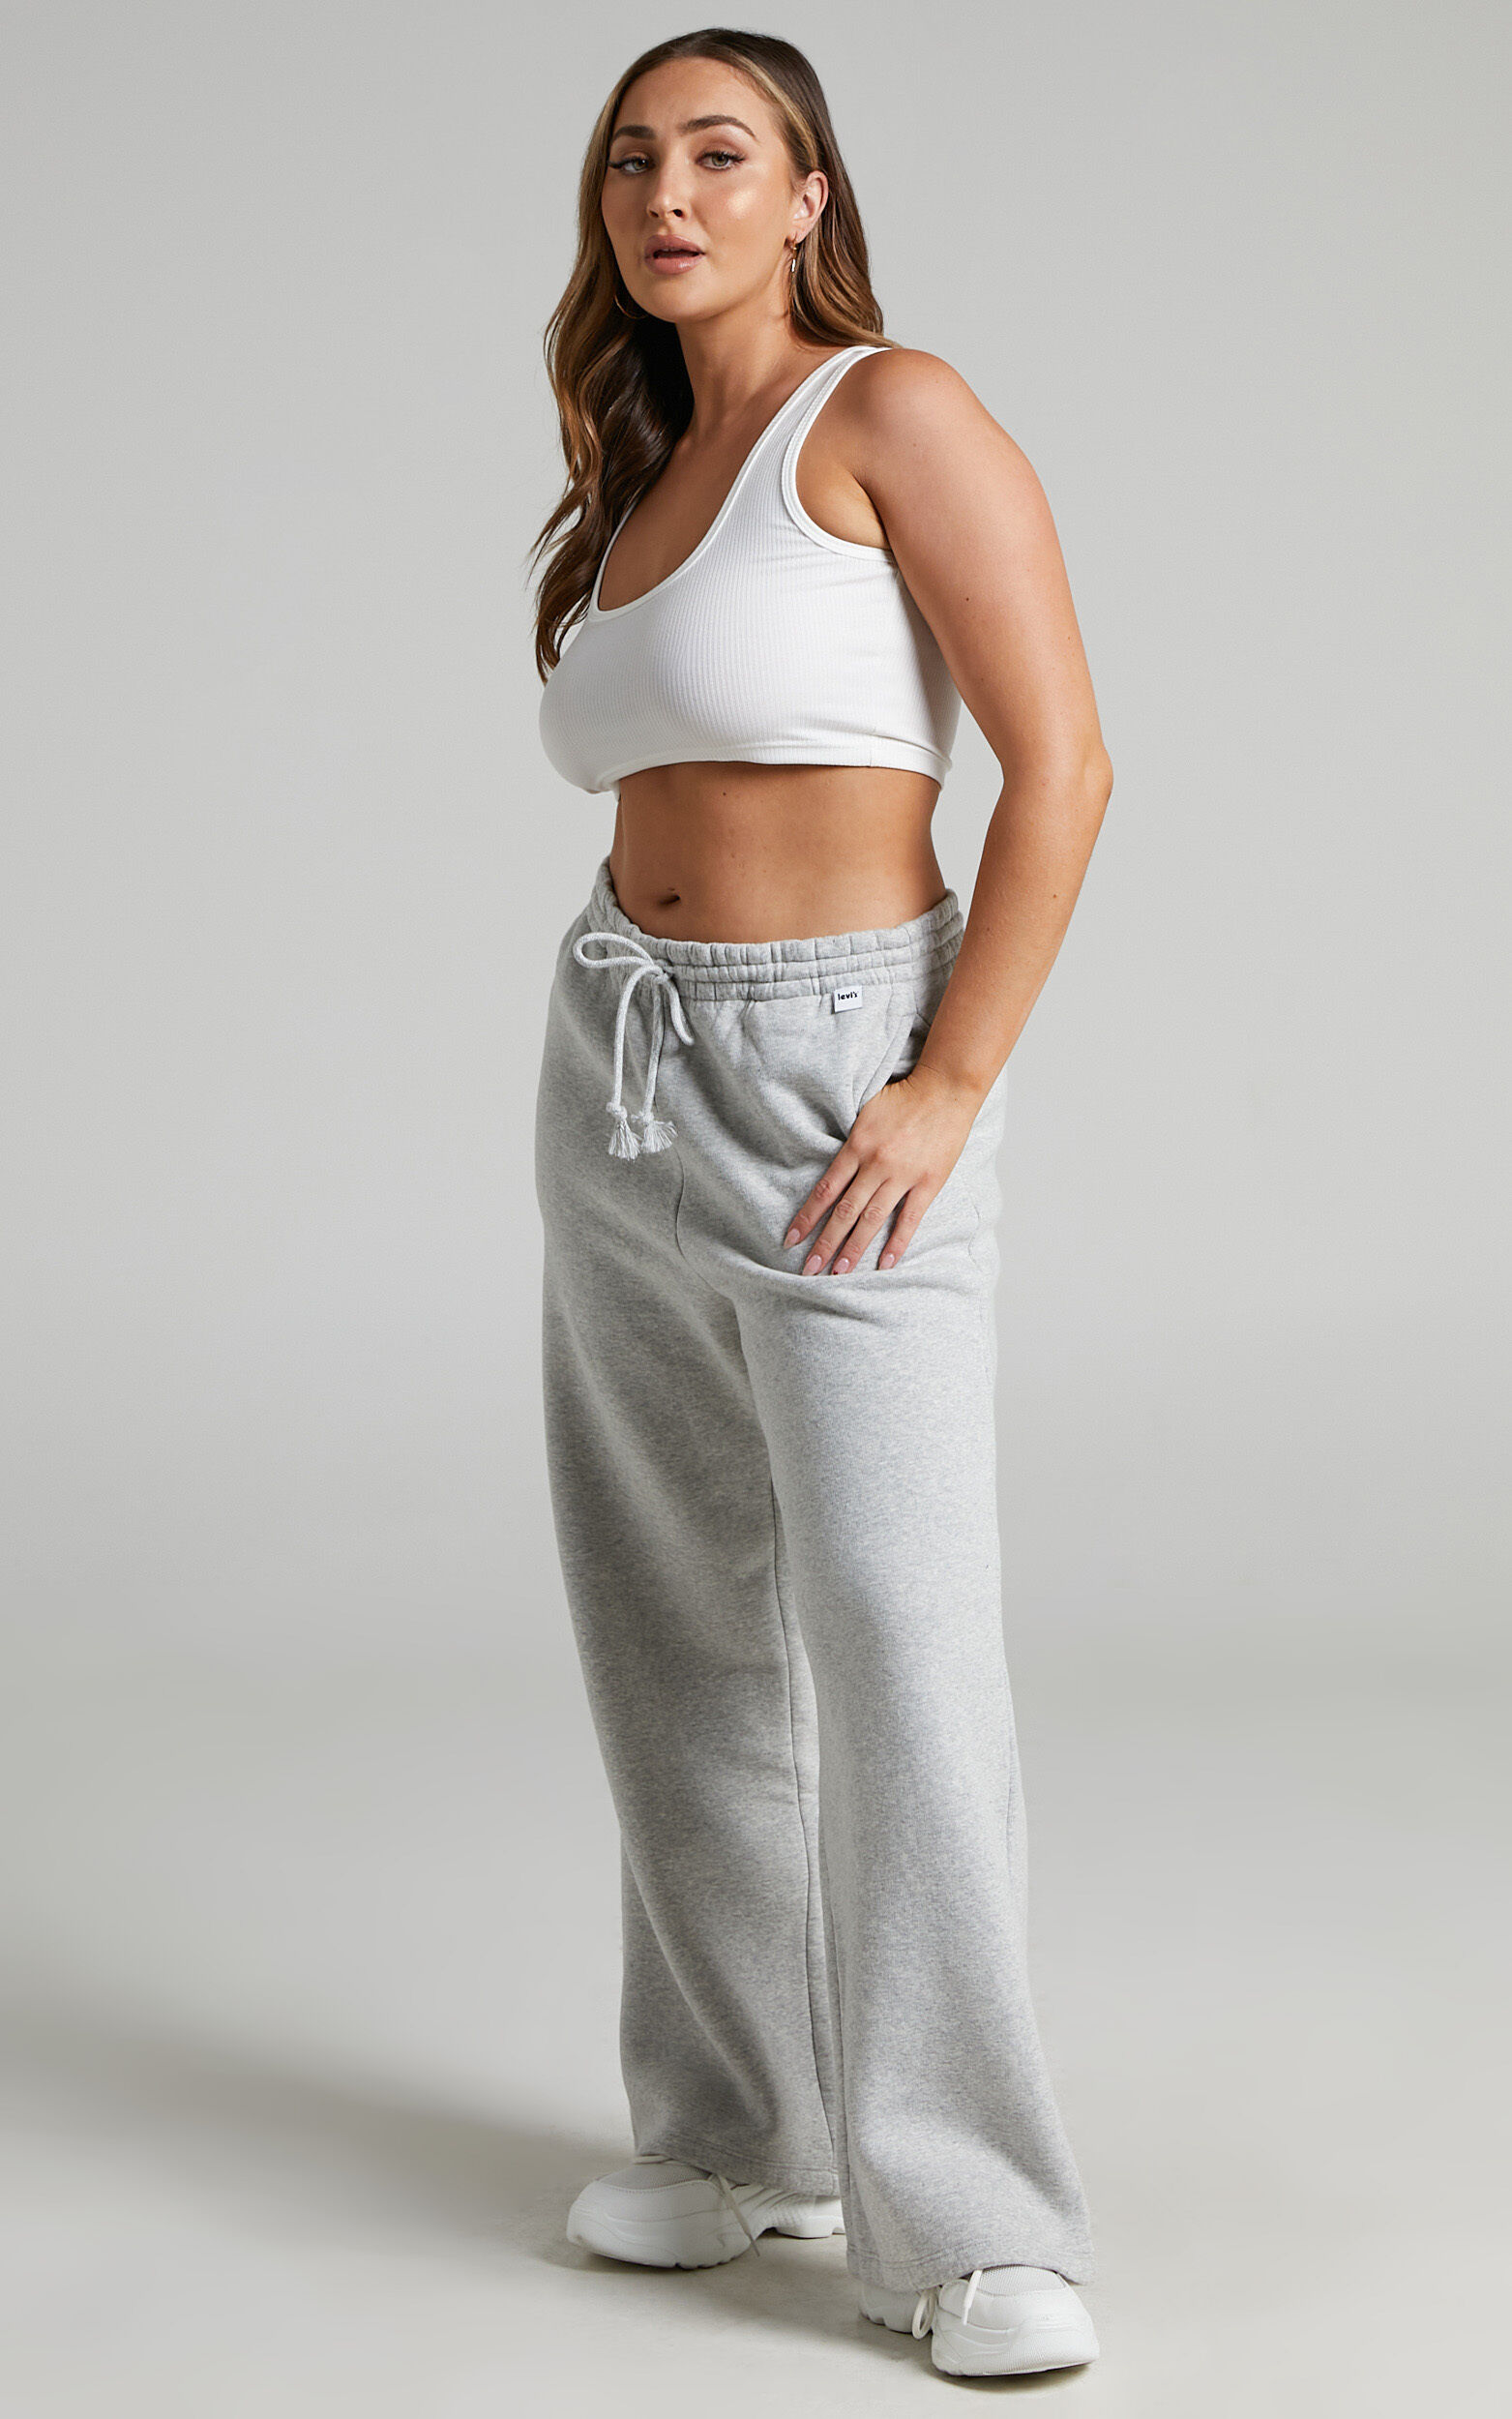 Levi's - Apartment Trackpants in Light Mist Heather - L, GRY1, super-hi-res image number null